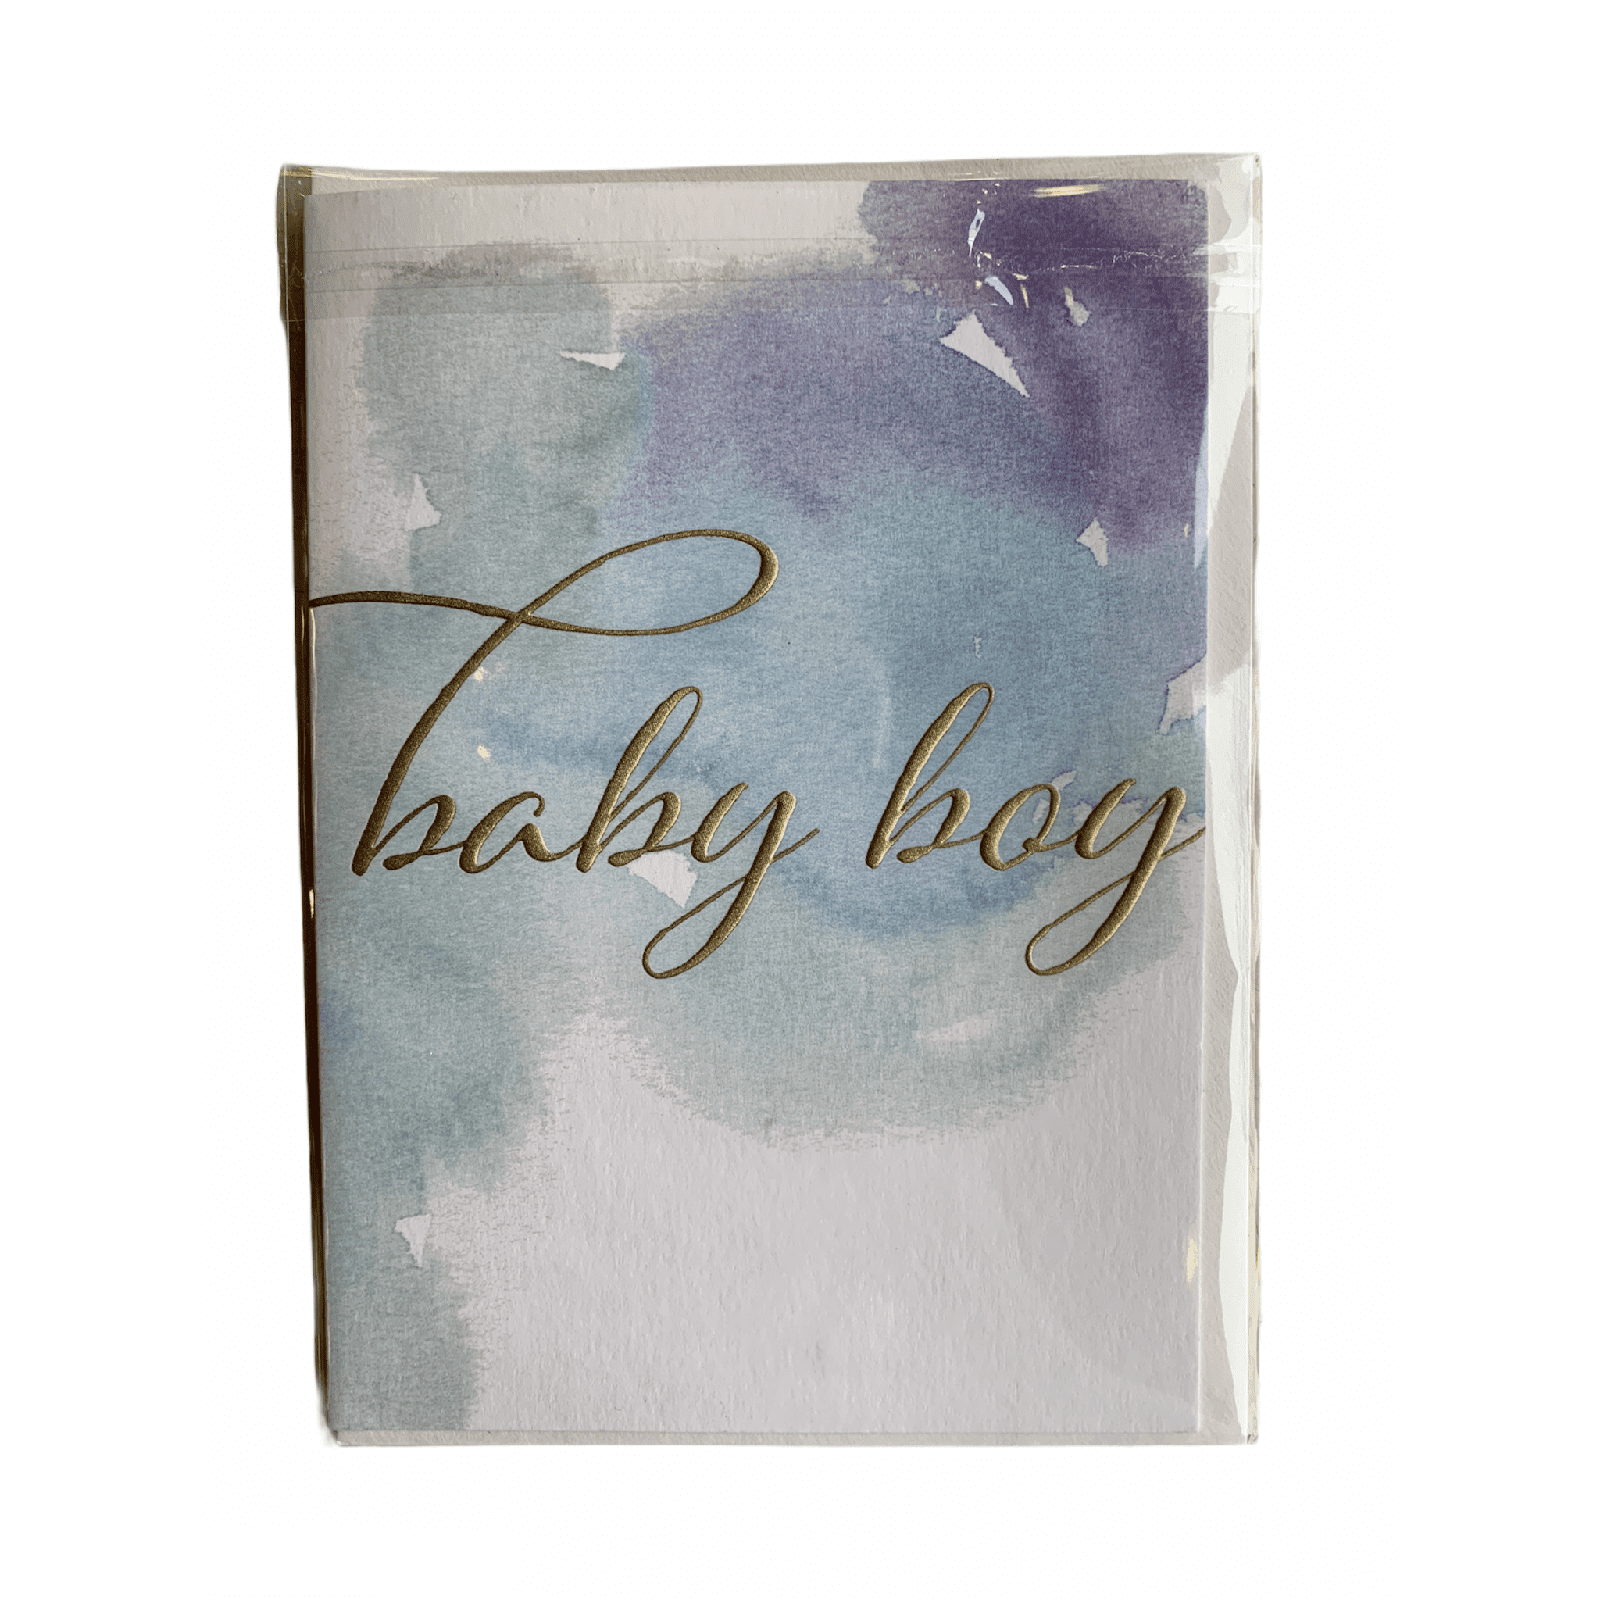 Baby Boy Watercolour - Greeting Card - Baby